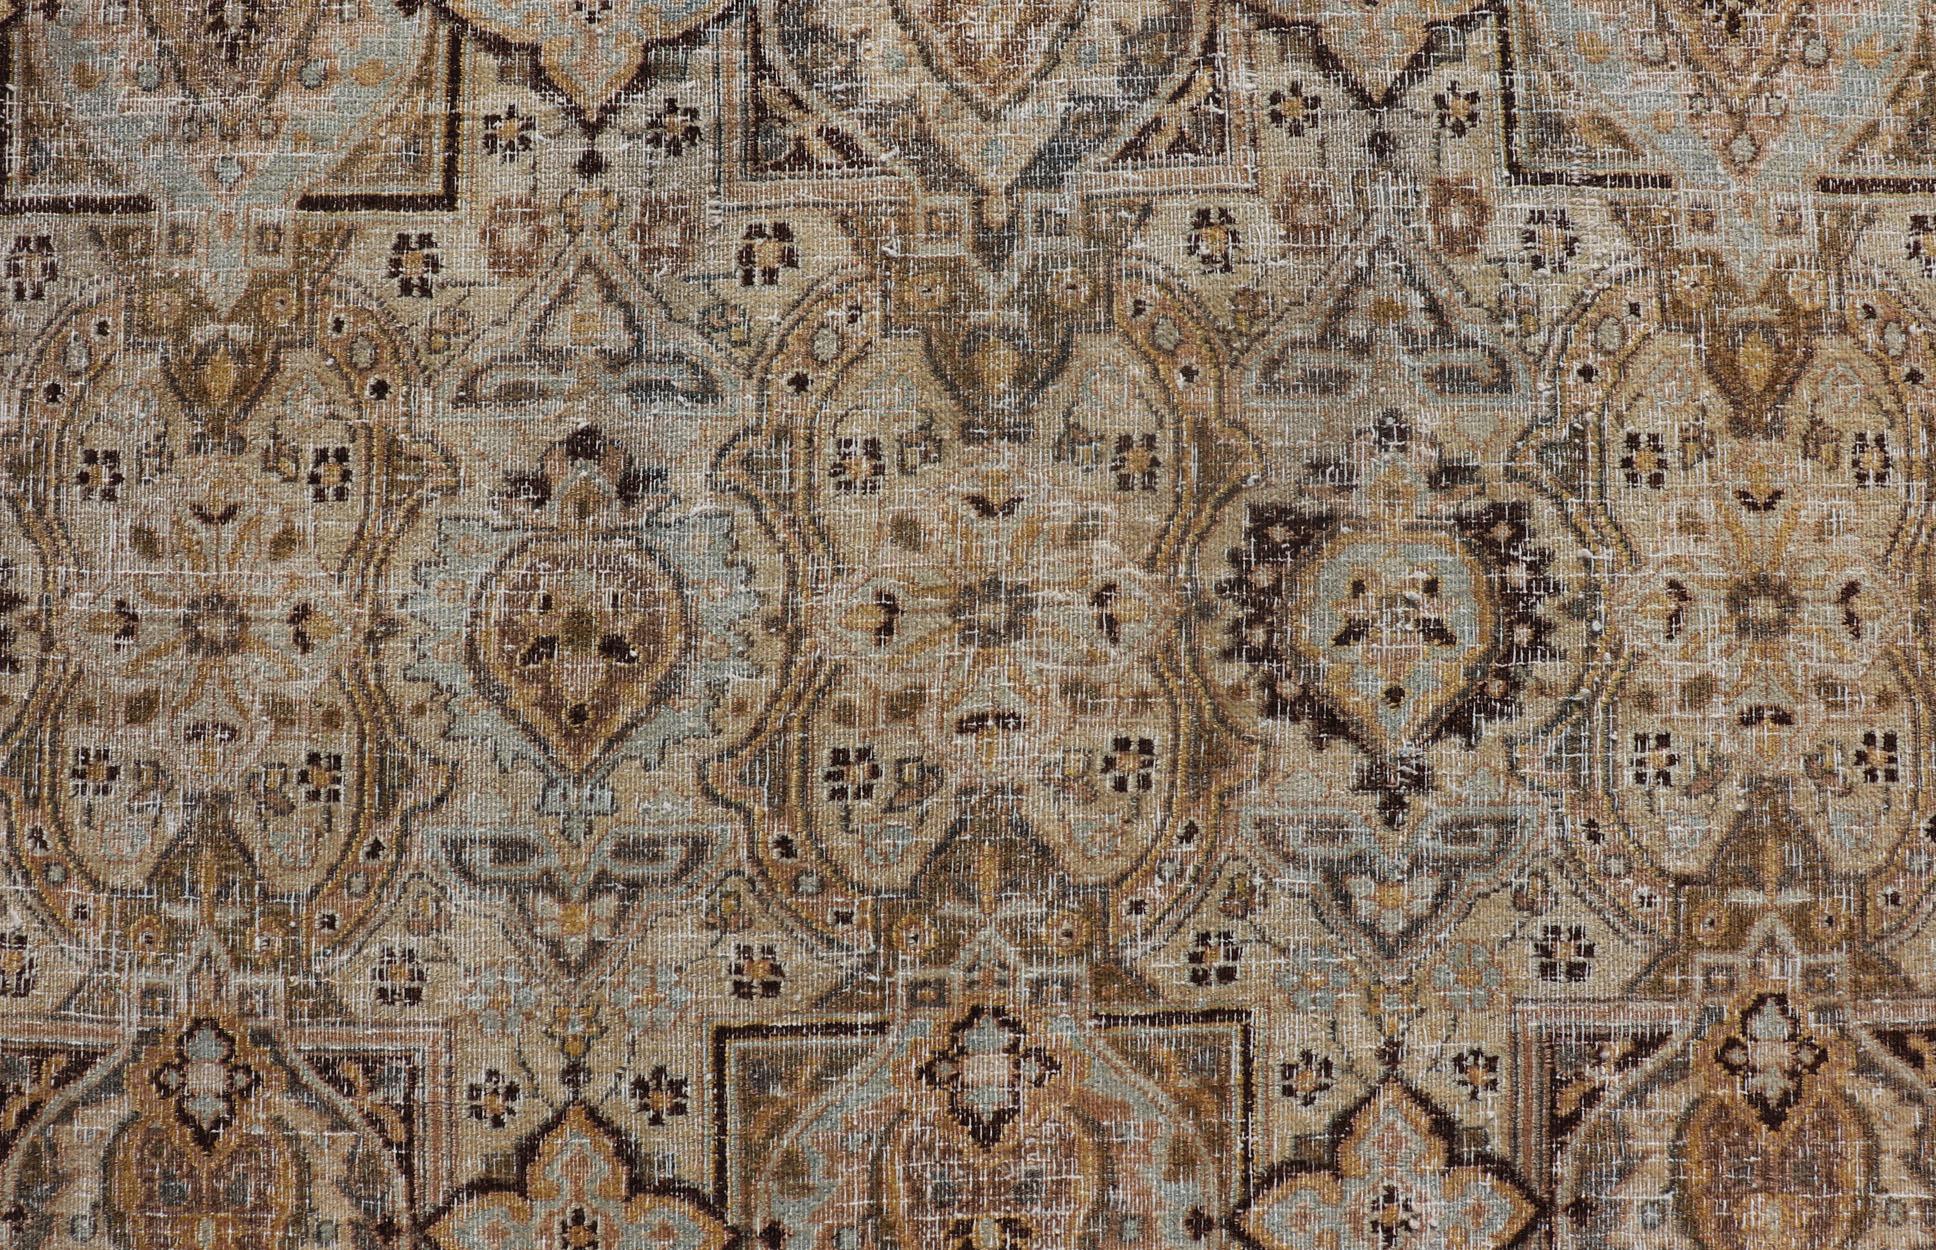  Antique Persian Khorassan Rug with Palmettes, Geometric Flowers in Soft Tones For Sale 3